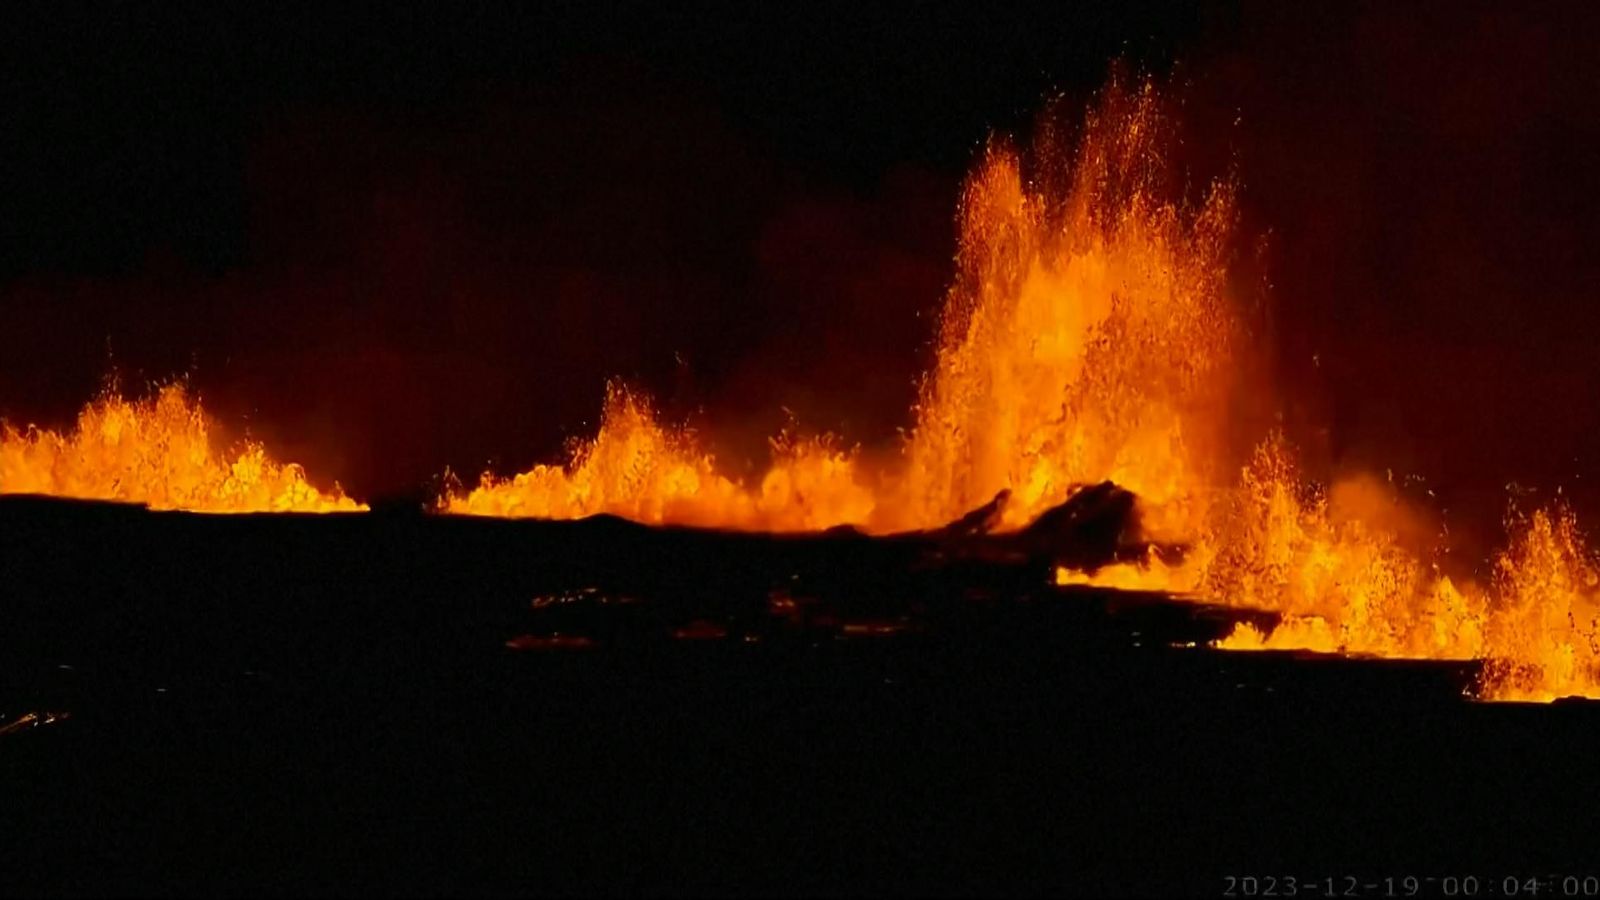 Iceland volcano: As Reykjanes peninsula erupts after weeks of activity, what is happening under the surface?